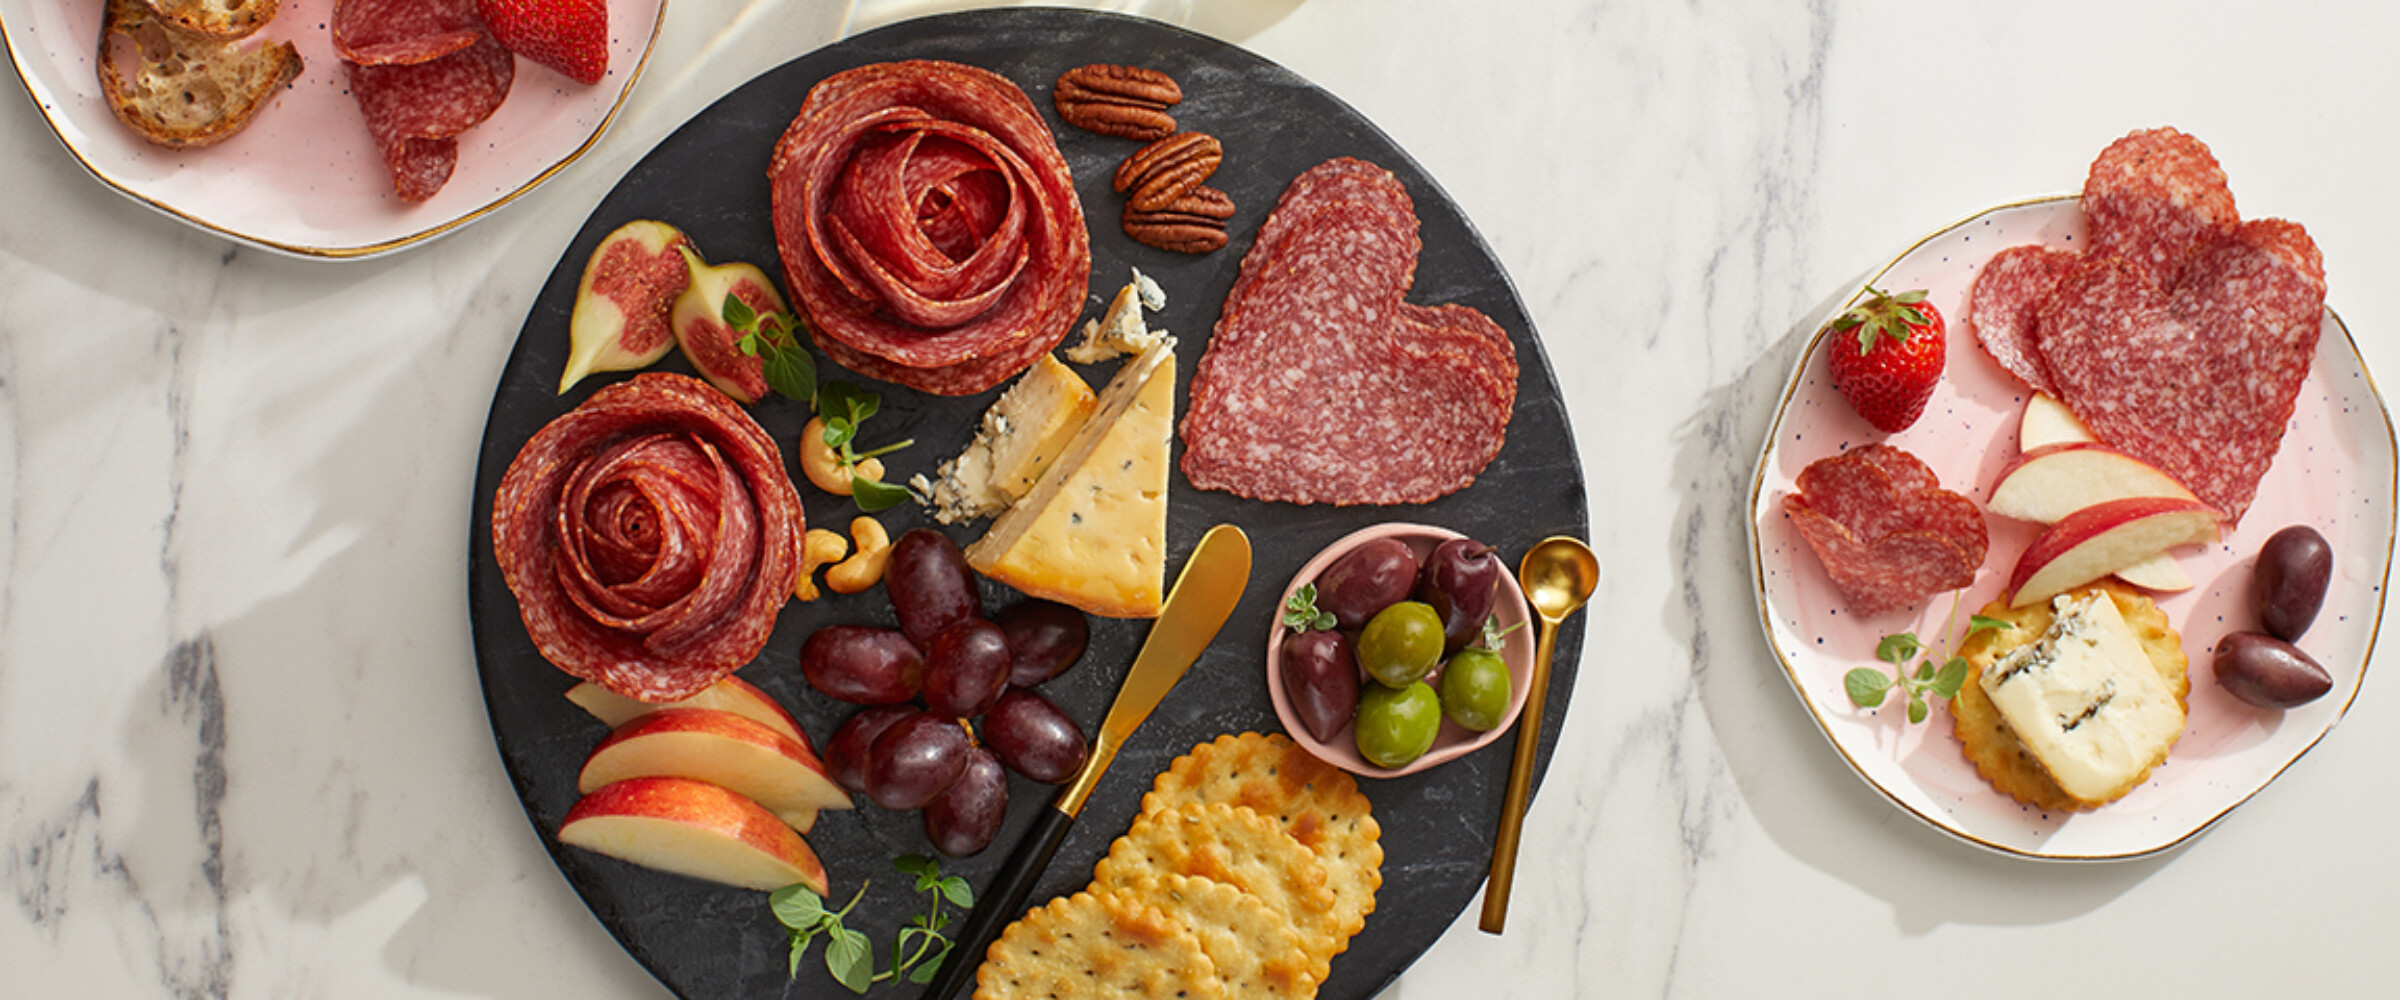 heart shaped salami and flower roses on a black grazing board.